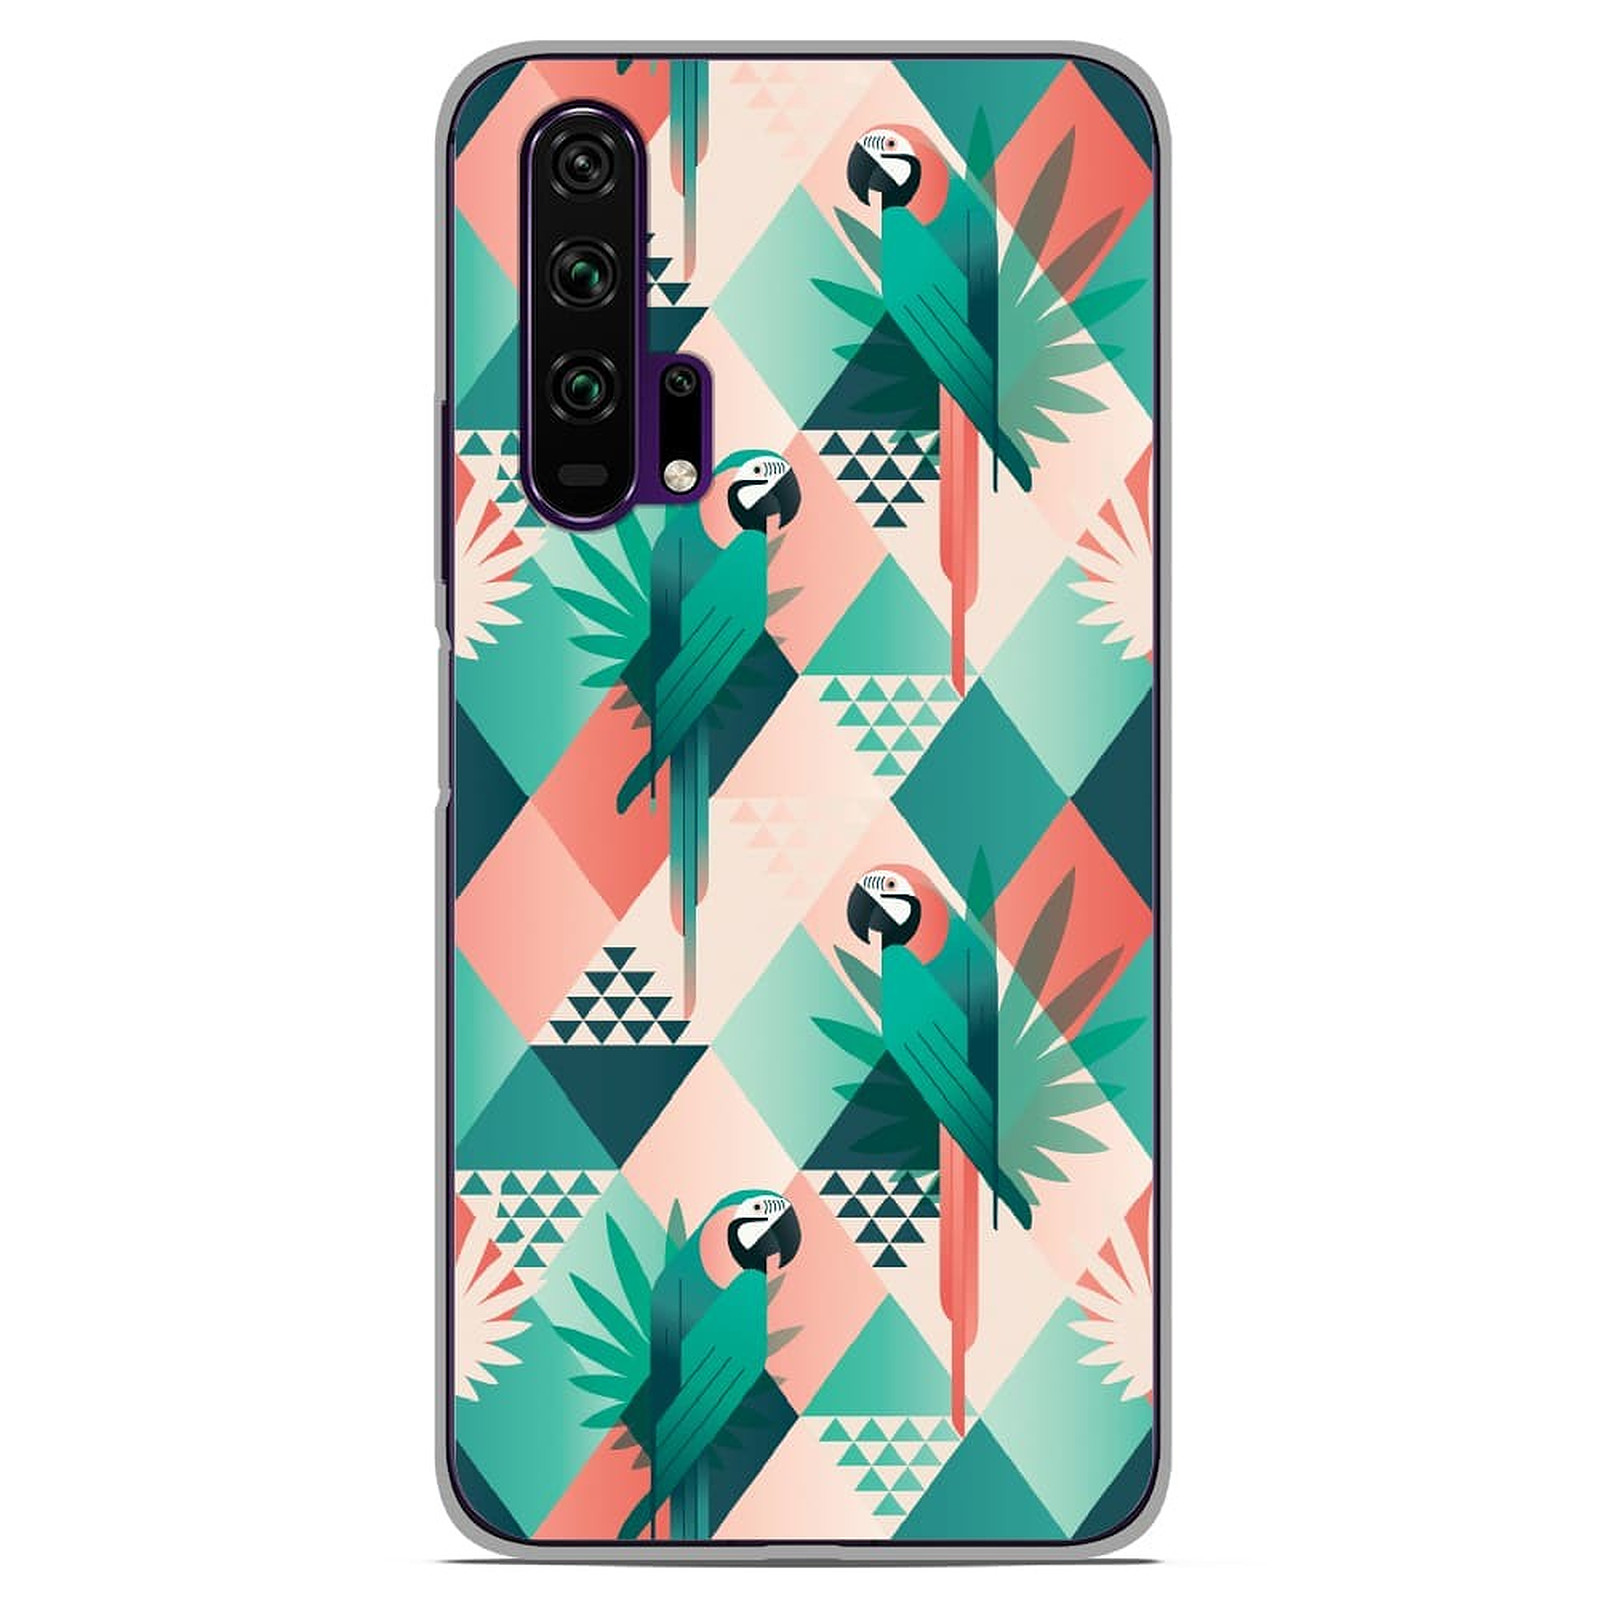 1001 Coques Coque silicone gel Huawei Honor 20 Pro motif Perroquet ge´ome´trique - Coque telephone 1001Coques